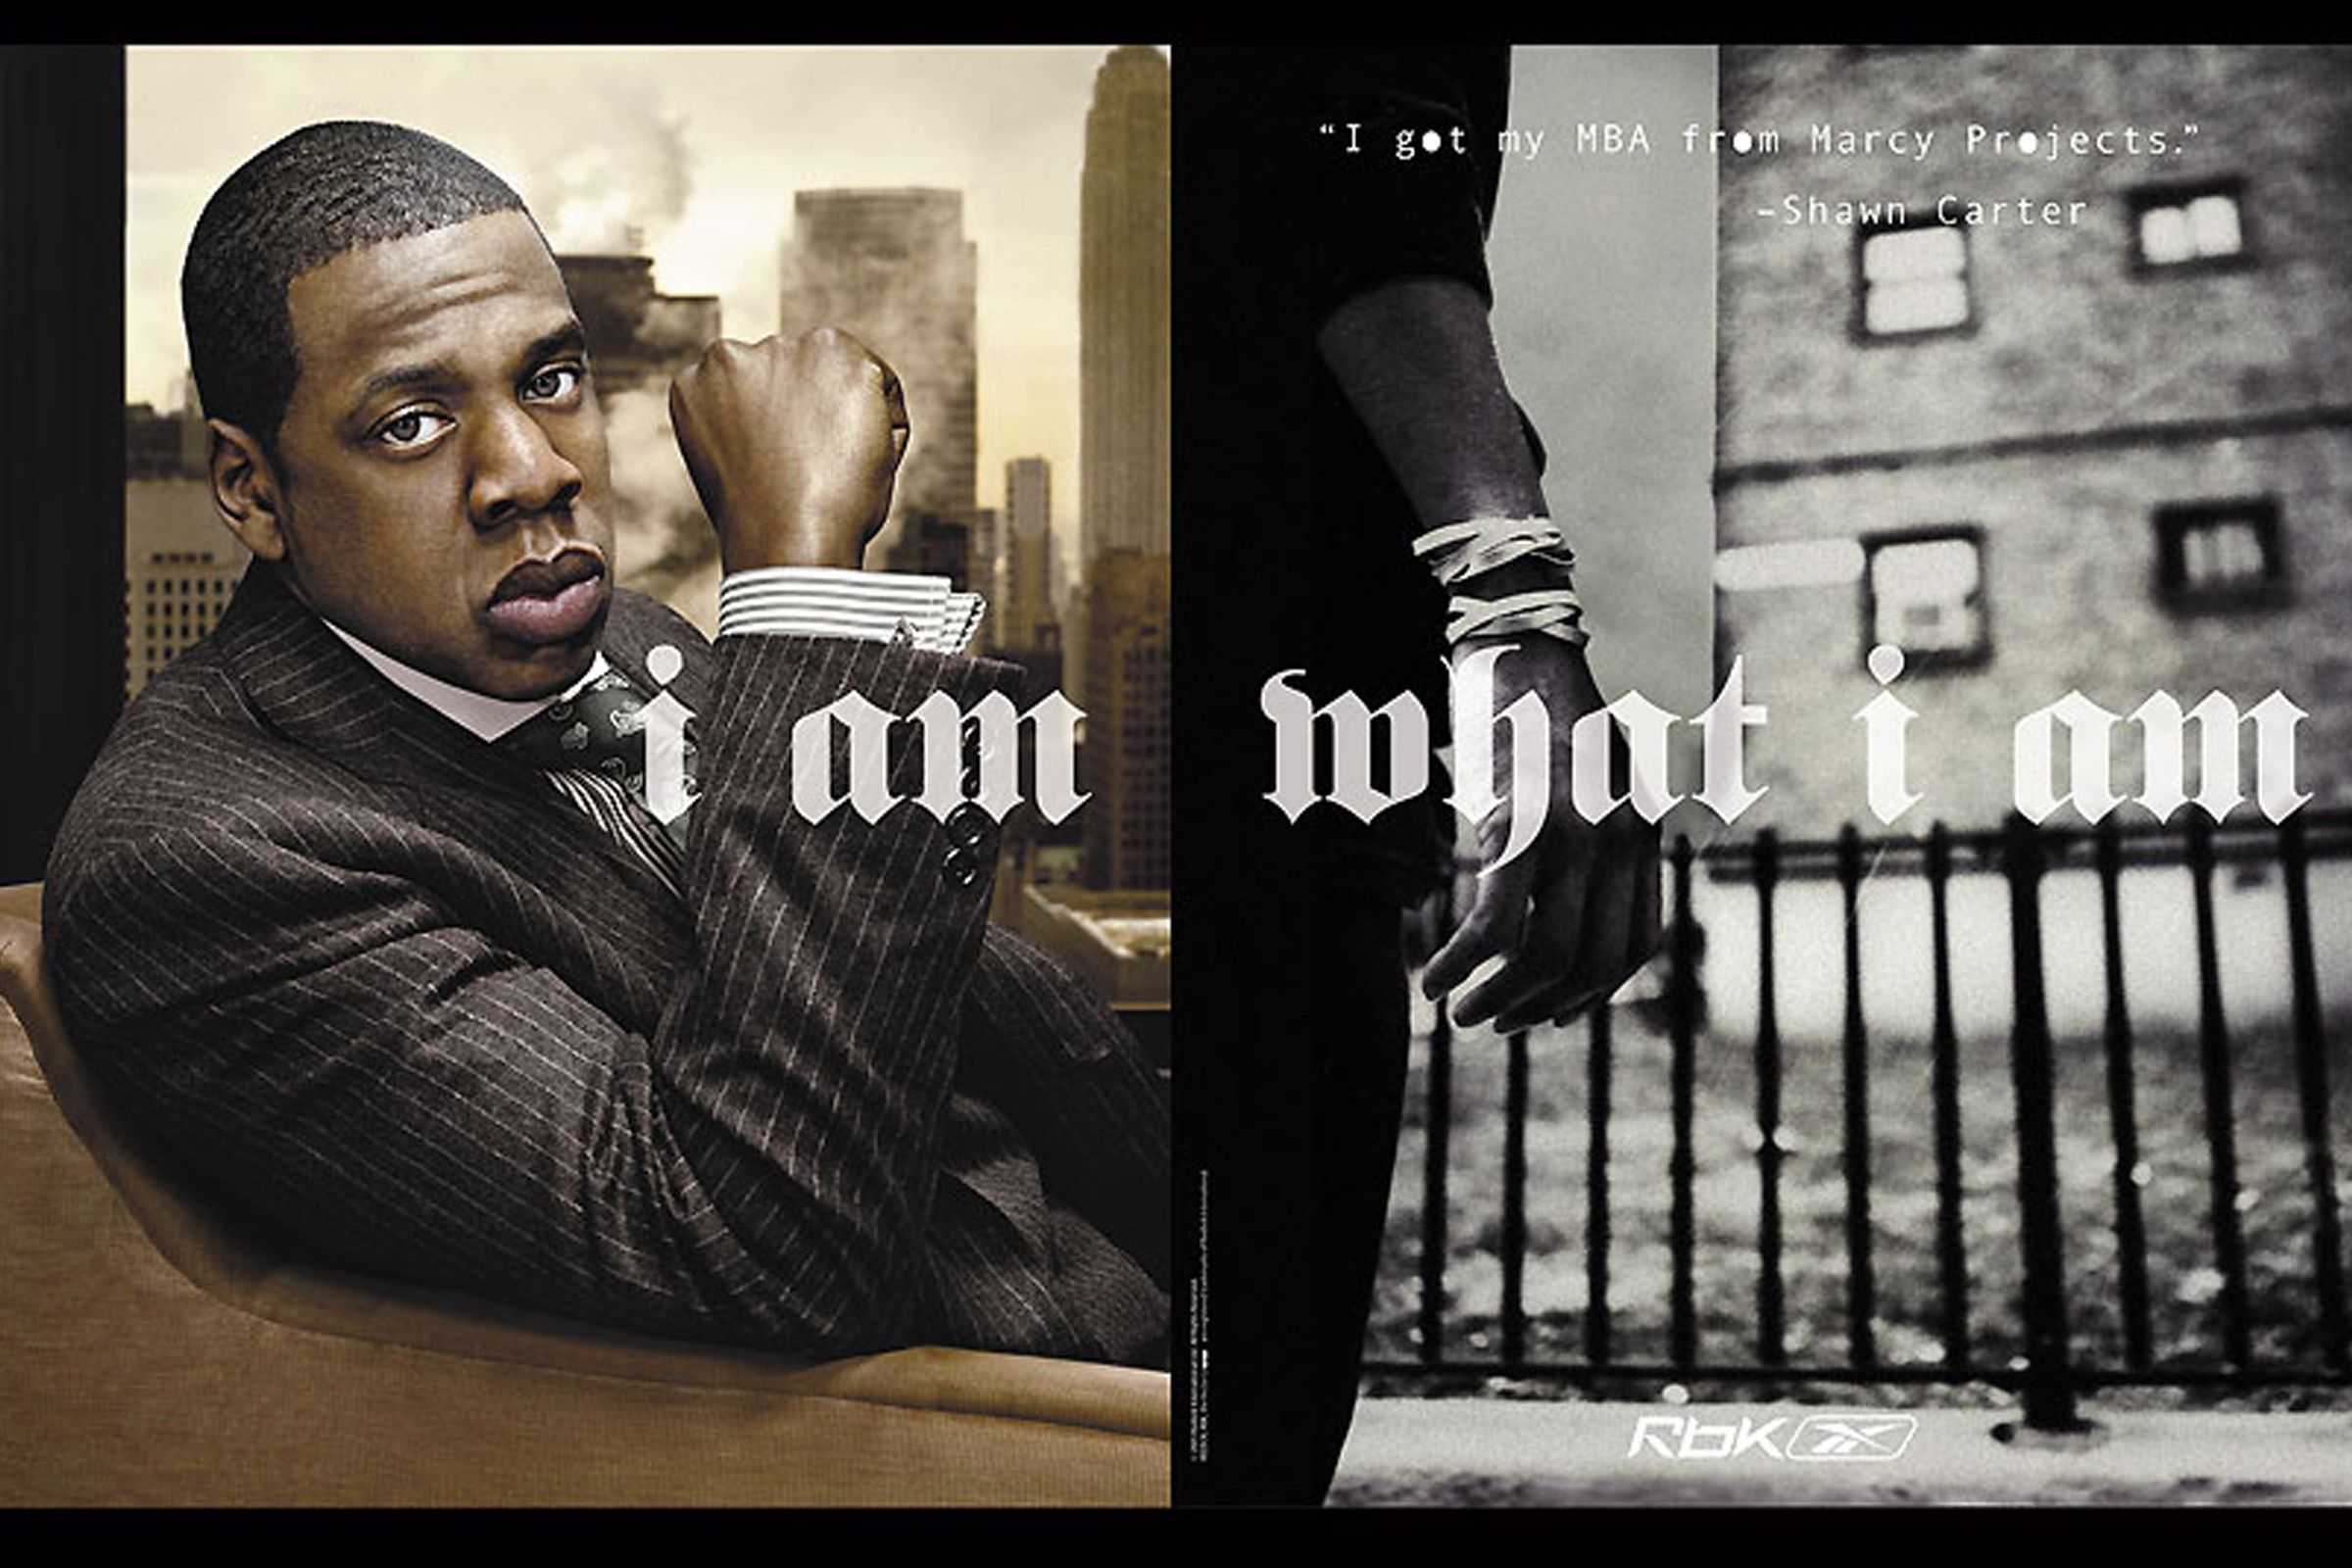 A Jay-Z Reebok print ad published in March 2005